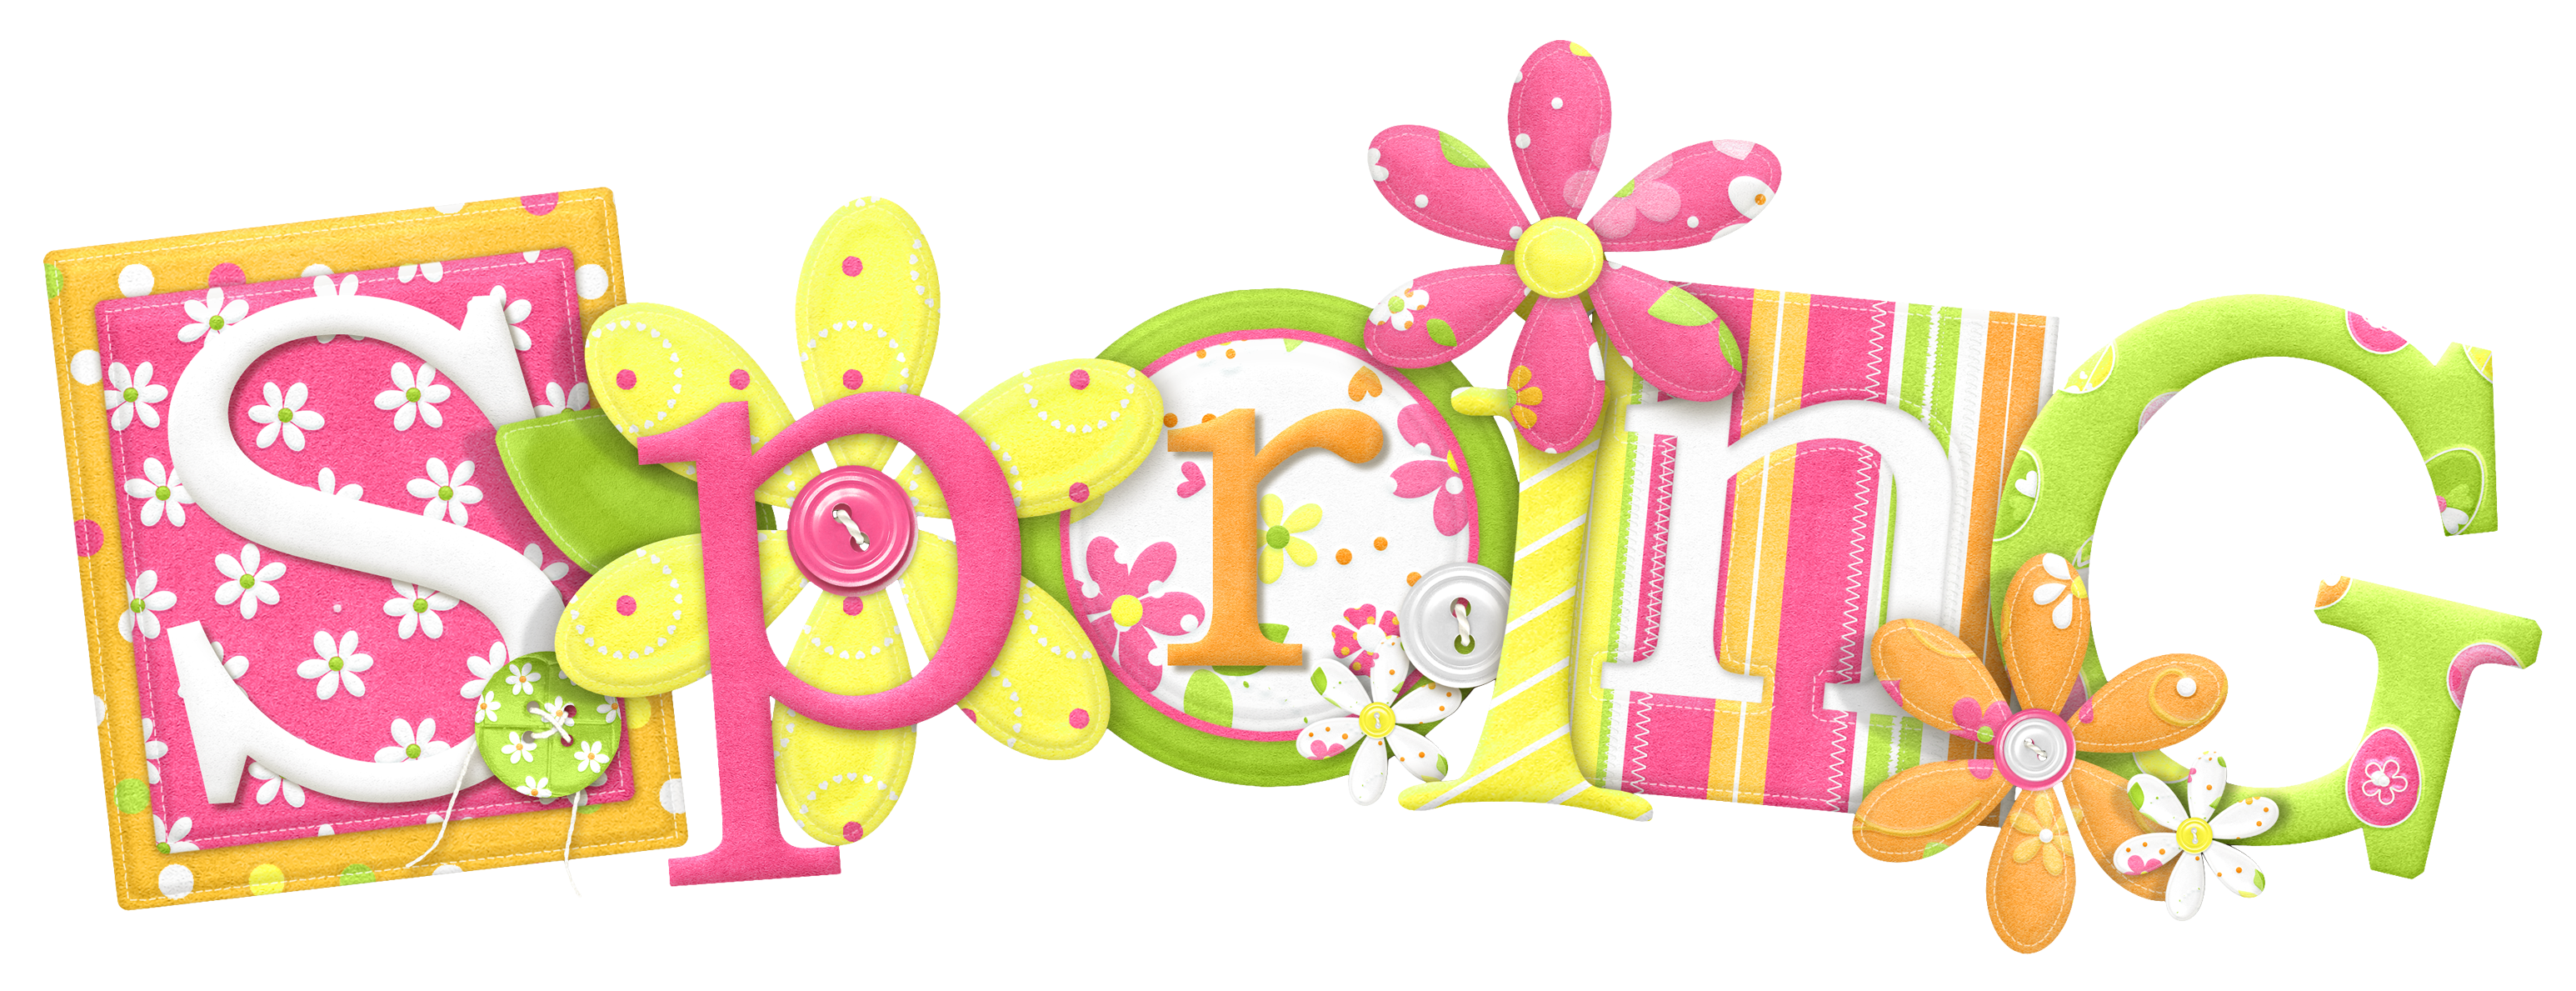 Spring clip art free clipart  - Free Spring Clipart Images